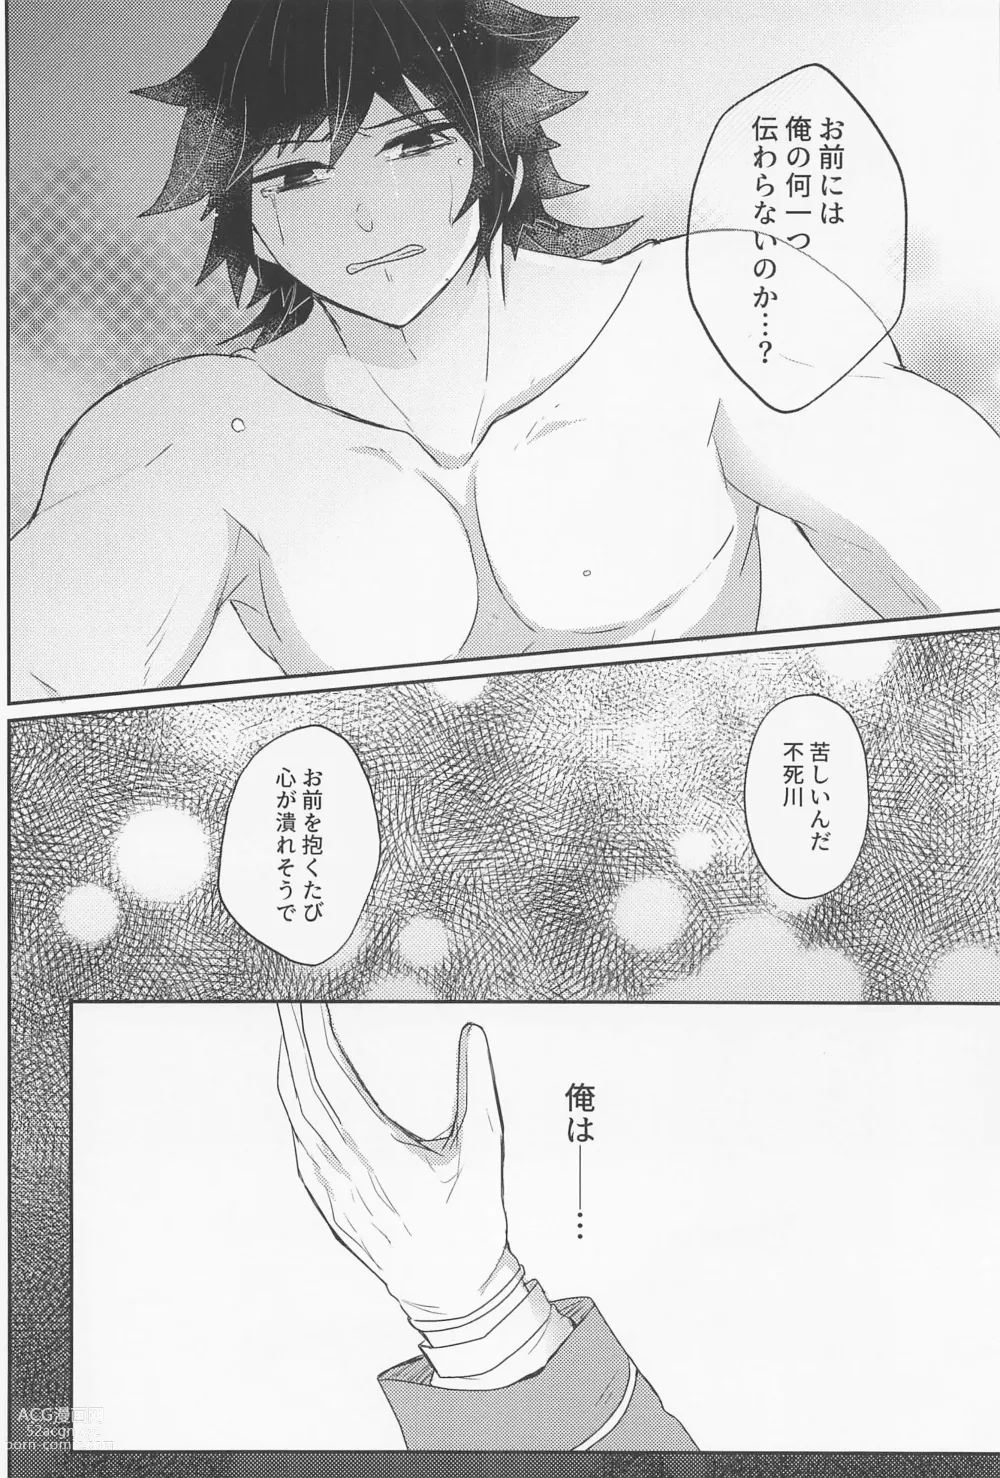 Page 38 of doujinshi Its all up to you